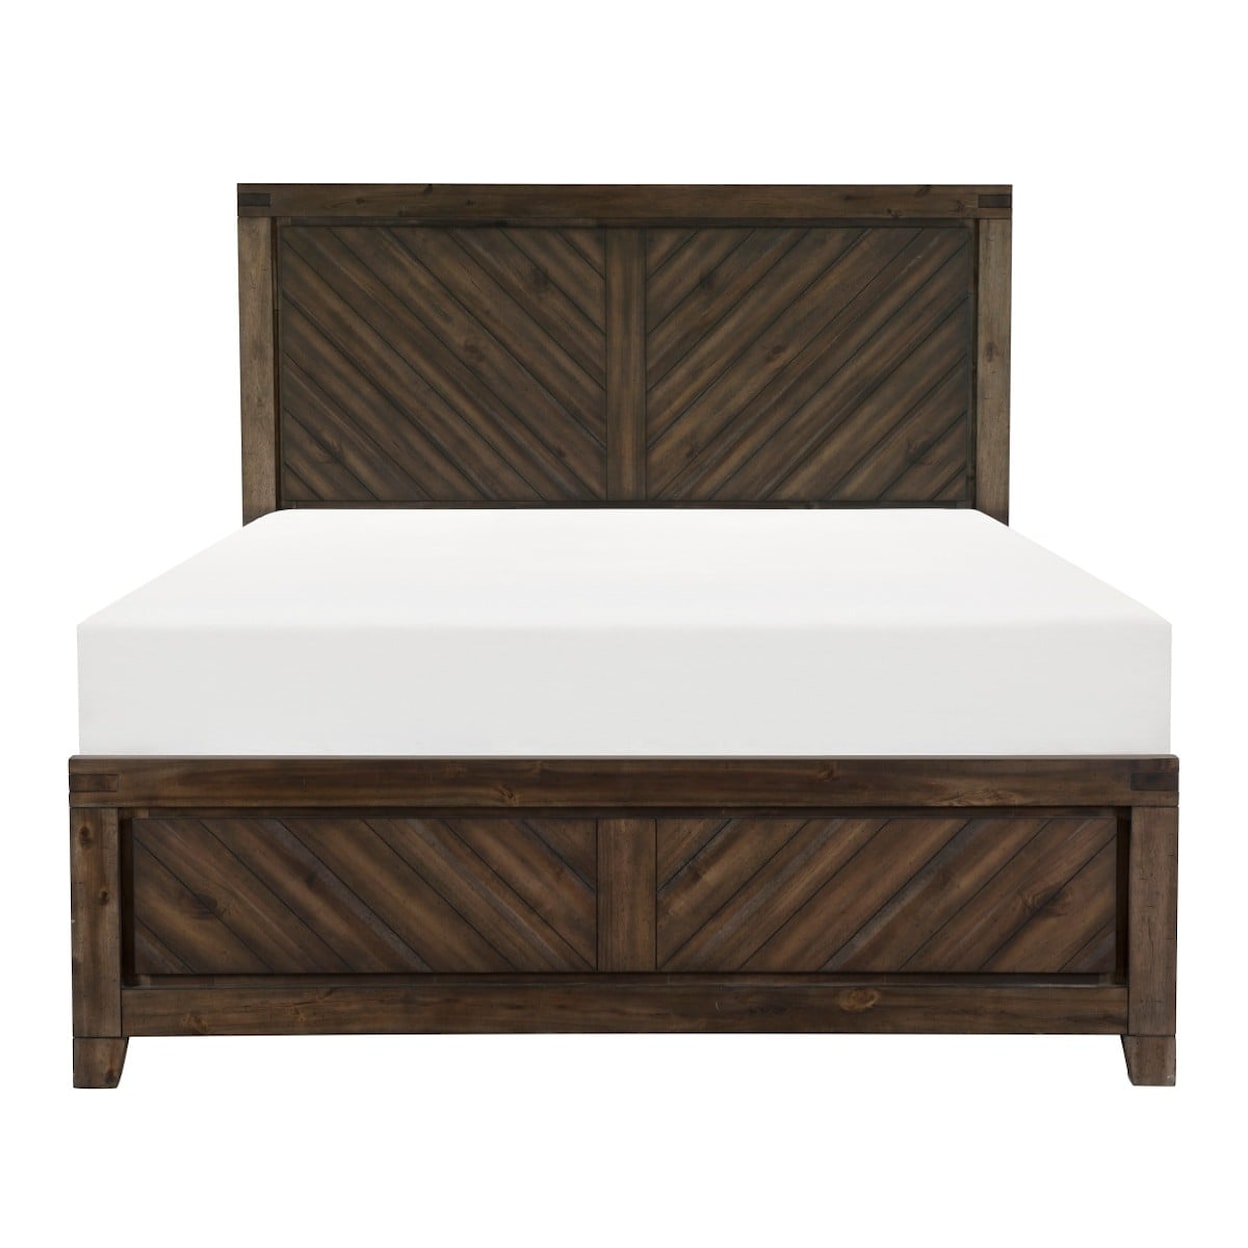 Homelegance Parnell Queen Bed